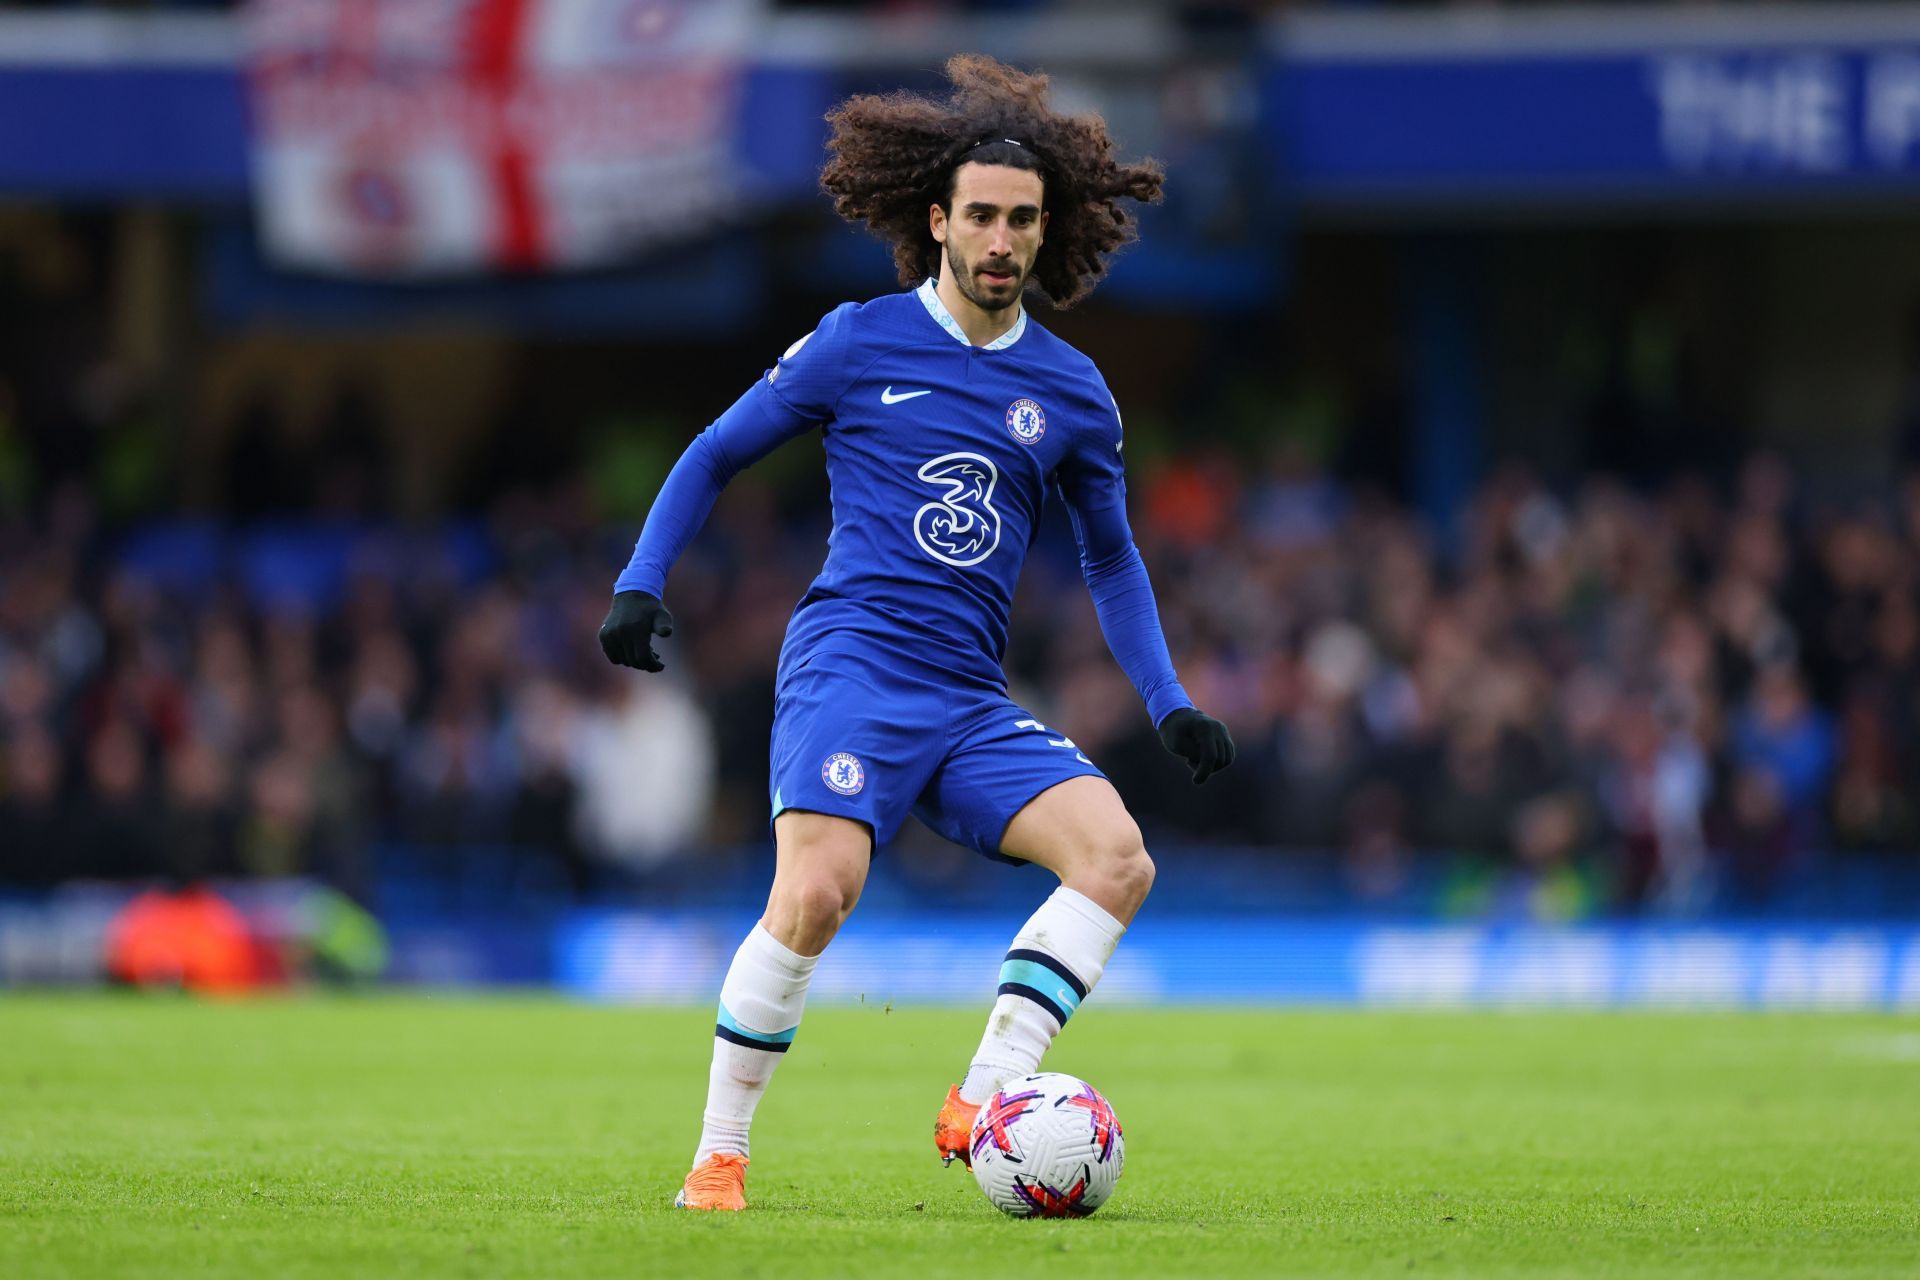 Marc Cucurella is likely to be an understudy for Ben Chilwell next season.